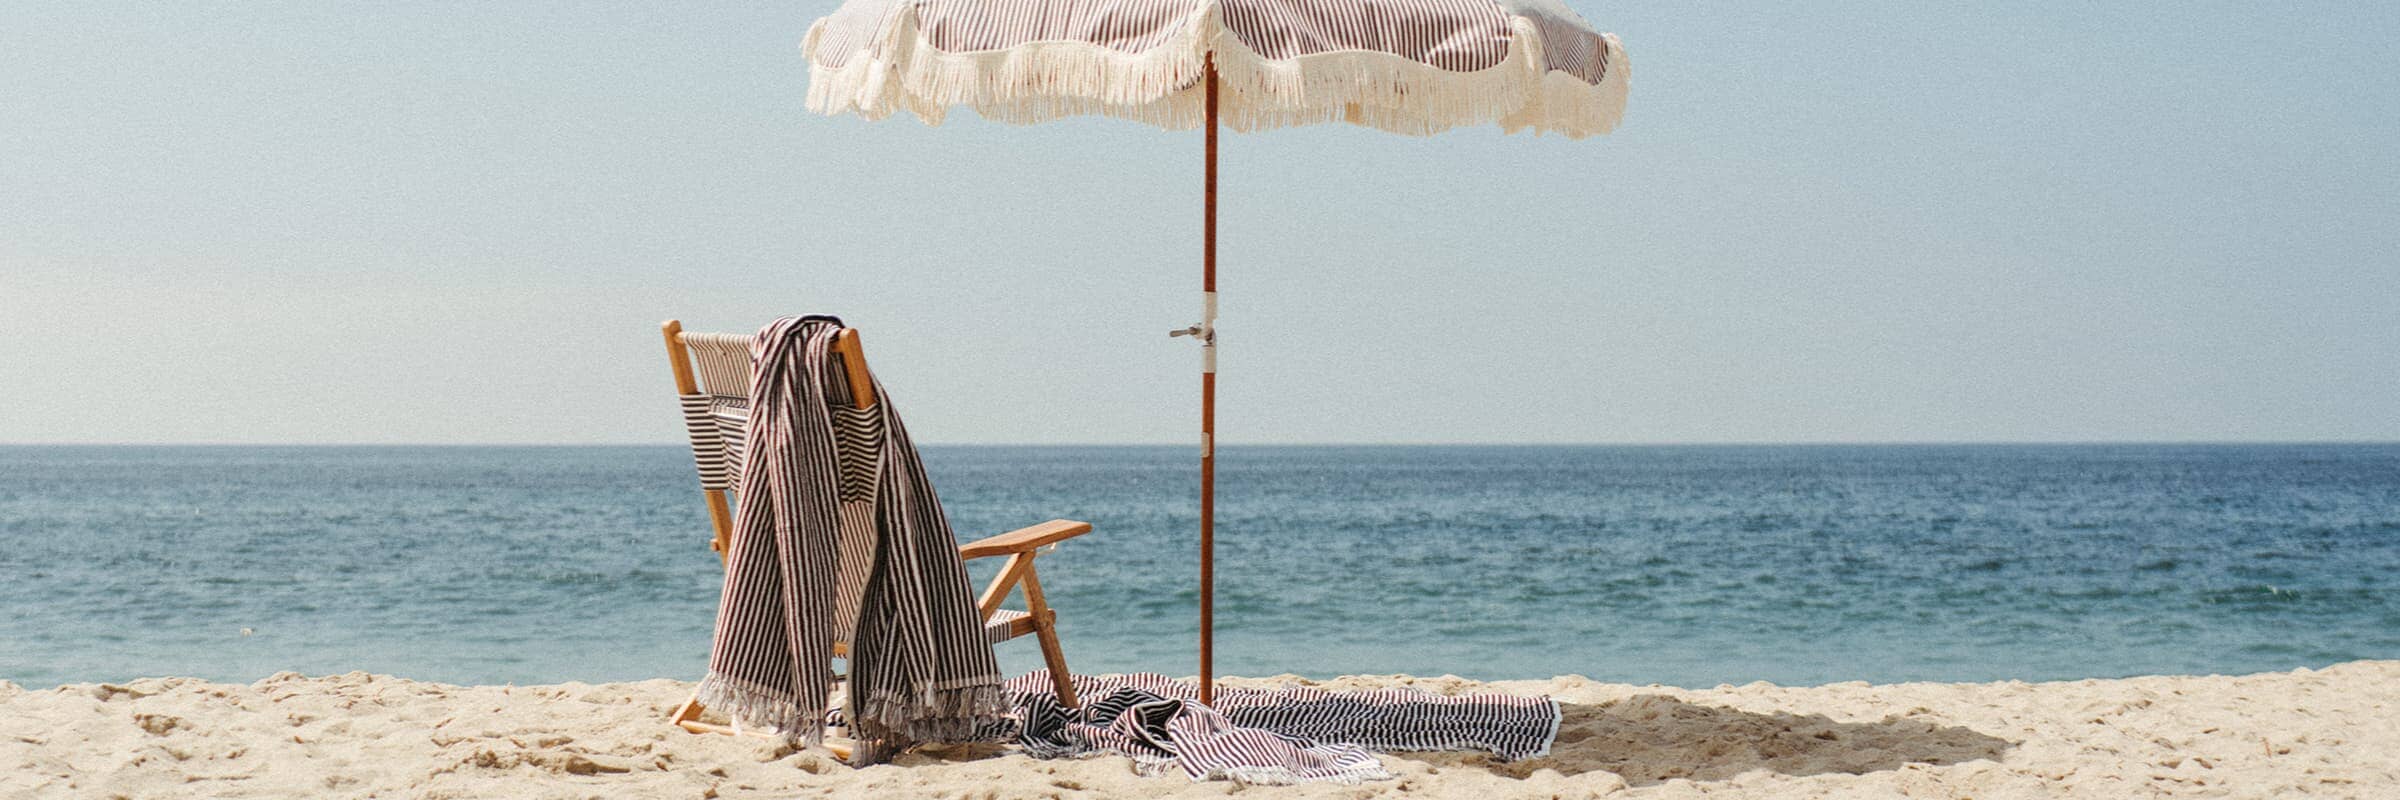 blue striped chair and umbrella with a beach towel on the sand